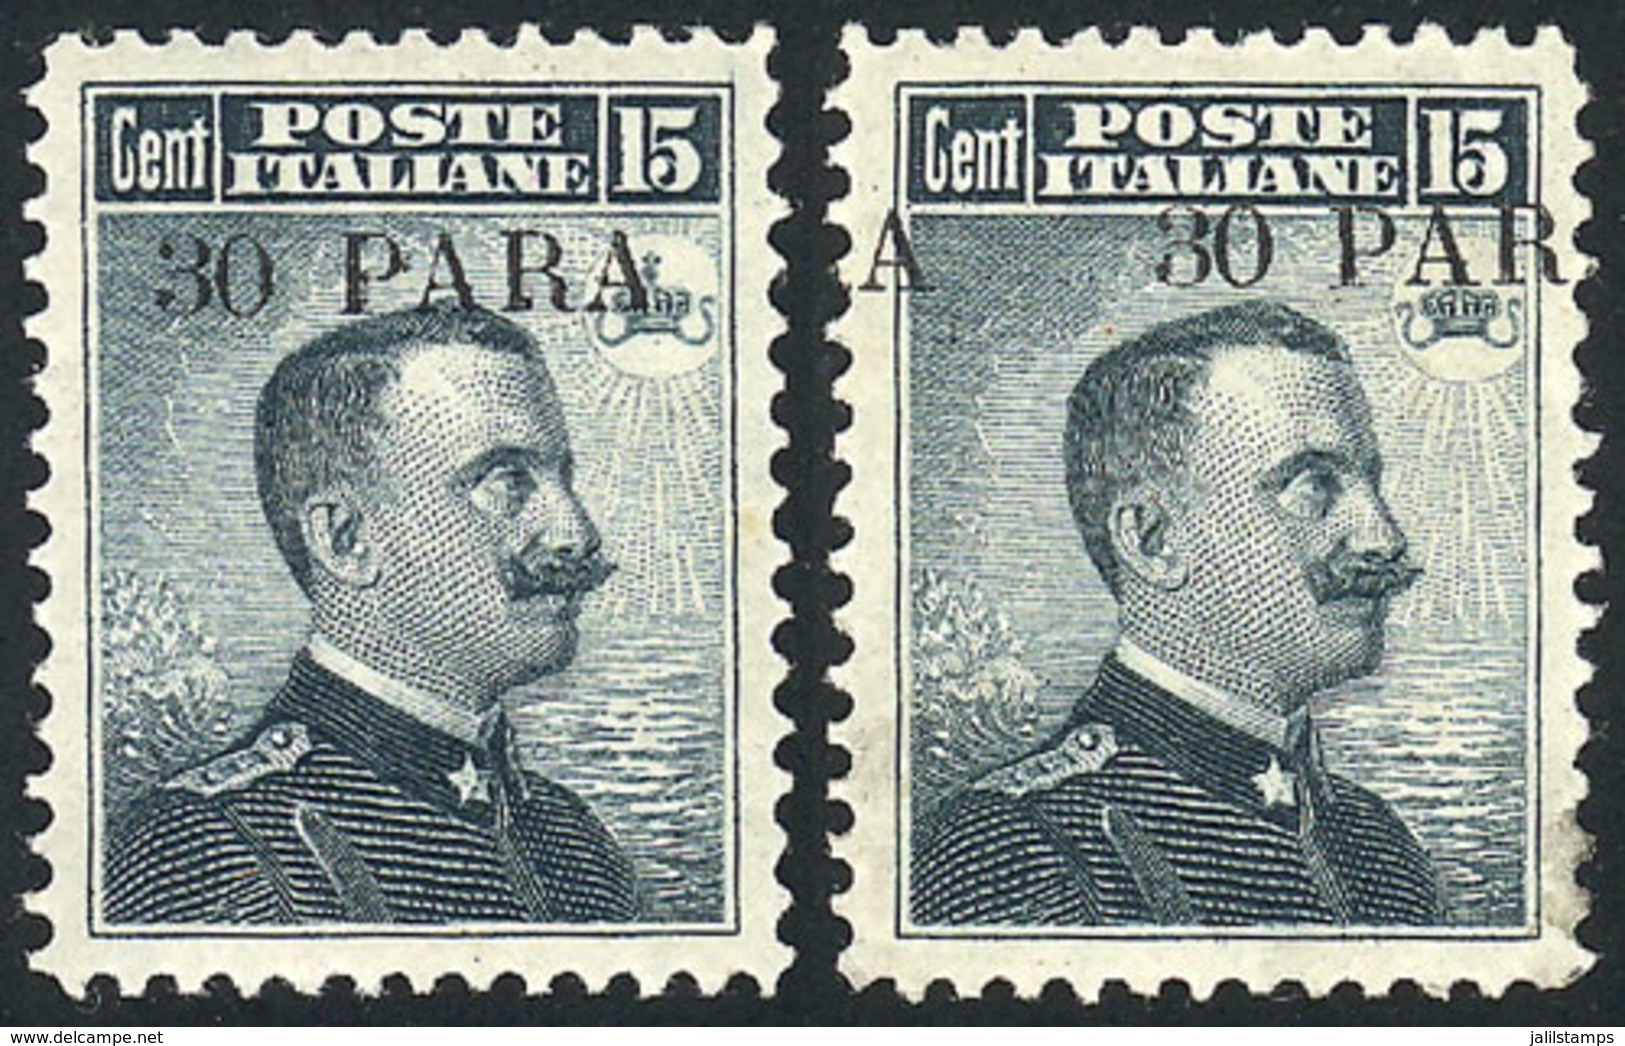 ITALY - LEVANT: Scott 15, 2 Examples, One With Very Shifted Overprint, VF Quality, Rare! - Unclassified